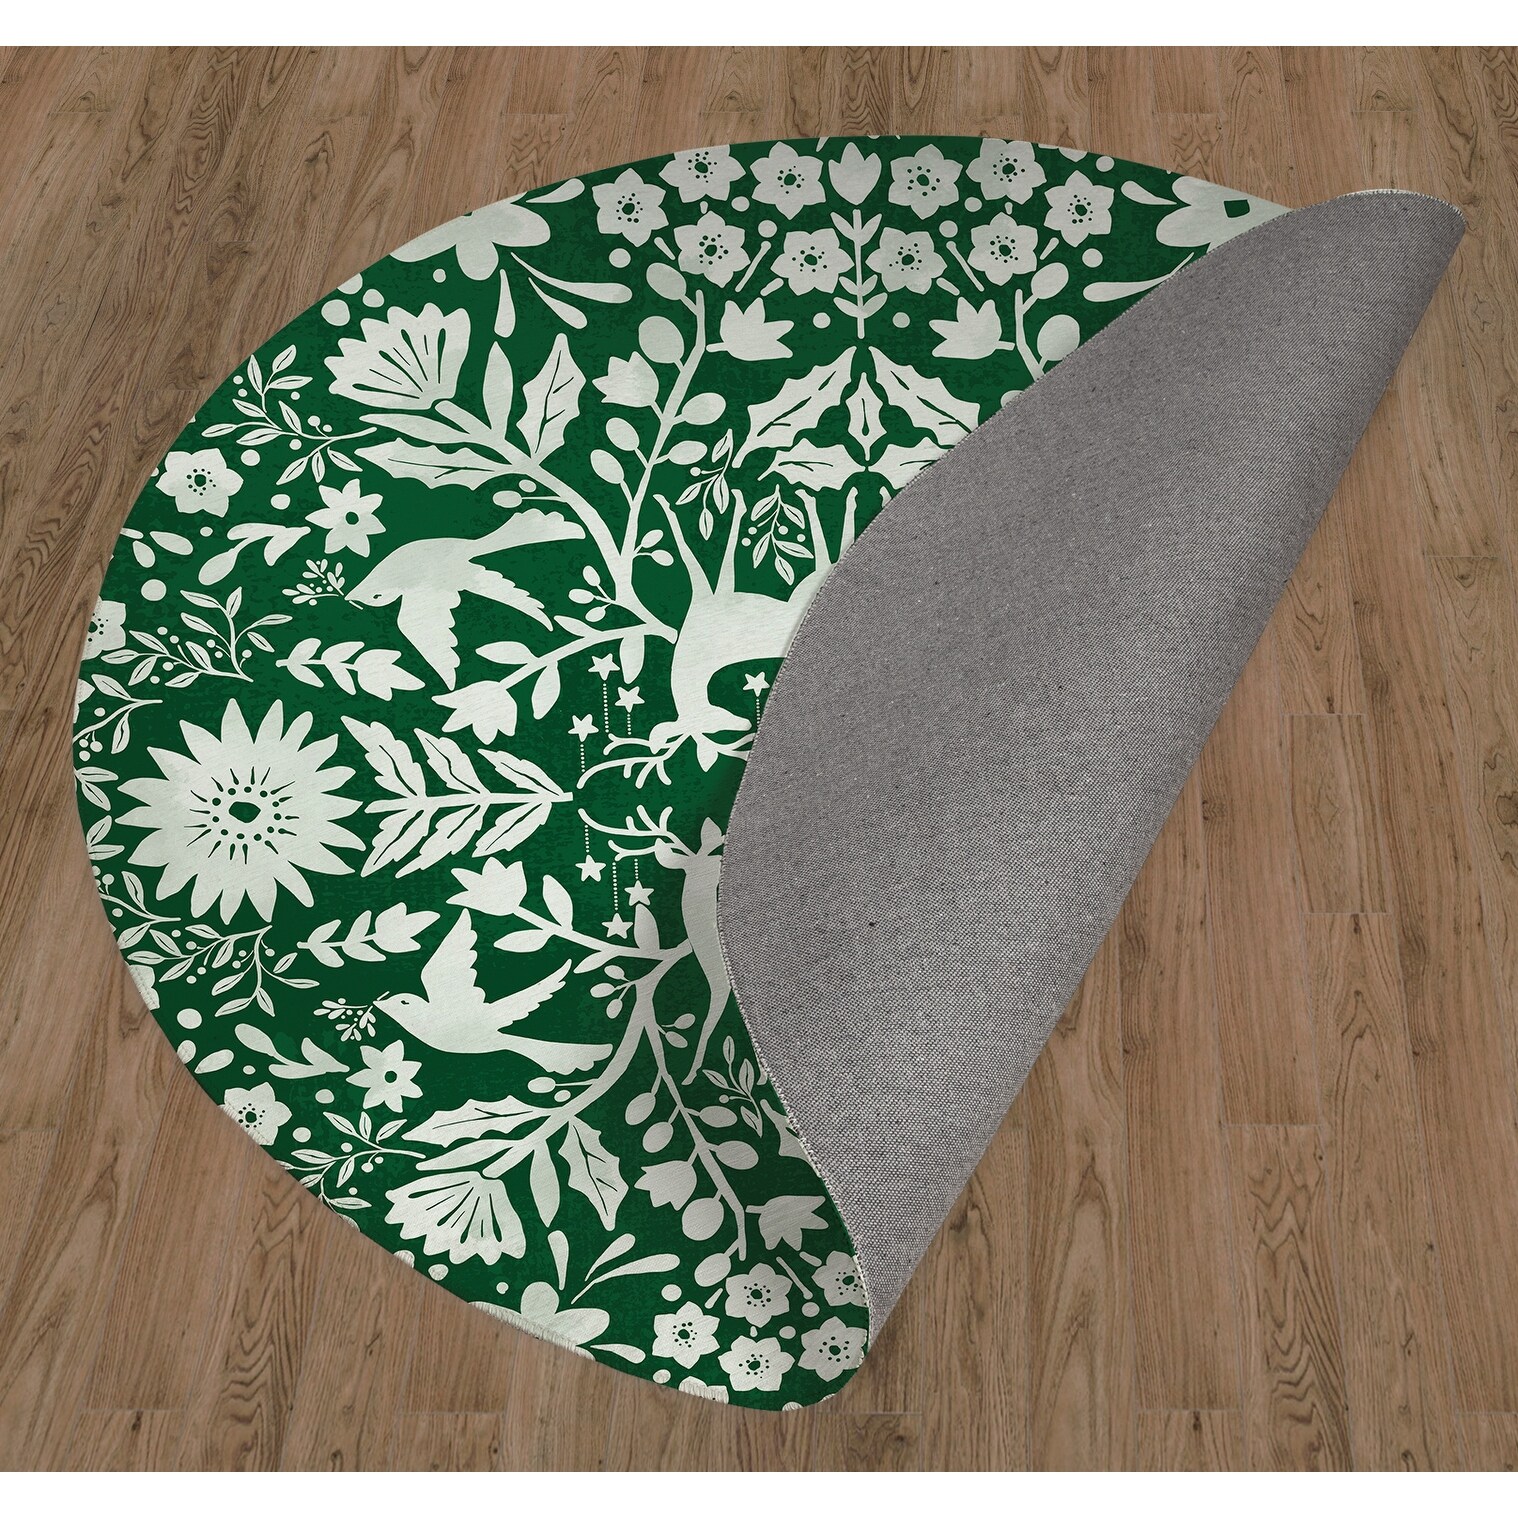 https://ak1.ostkcdn.com/images/products/is/images/direct/c8b9d6ac5476f4ba9a57c30c075adcf93295a578/A-WINTER-HOLIDAY-EVERGREEN-Indoor-Floor-Mat-By-Kavka-Designs.jpg